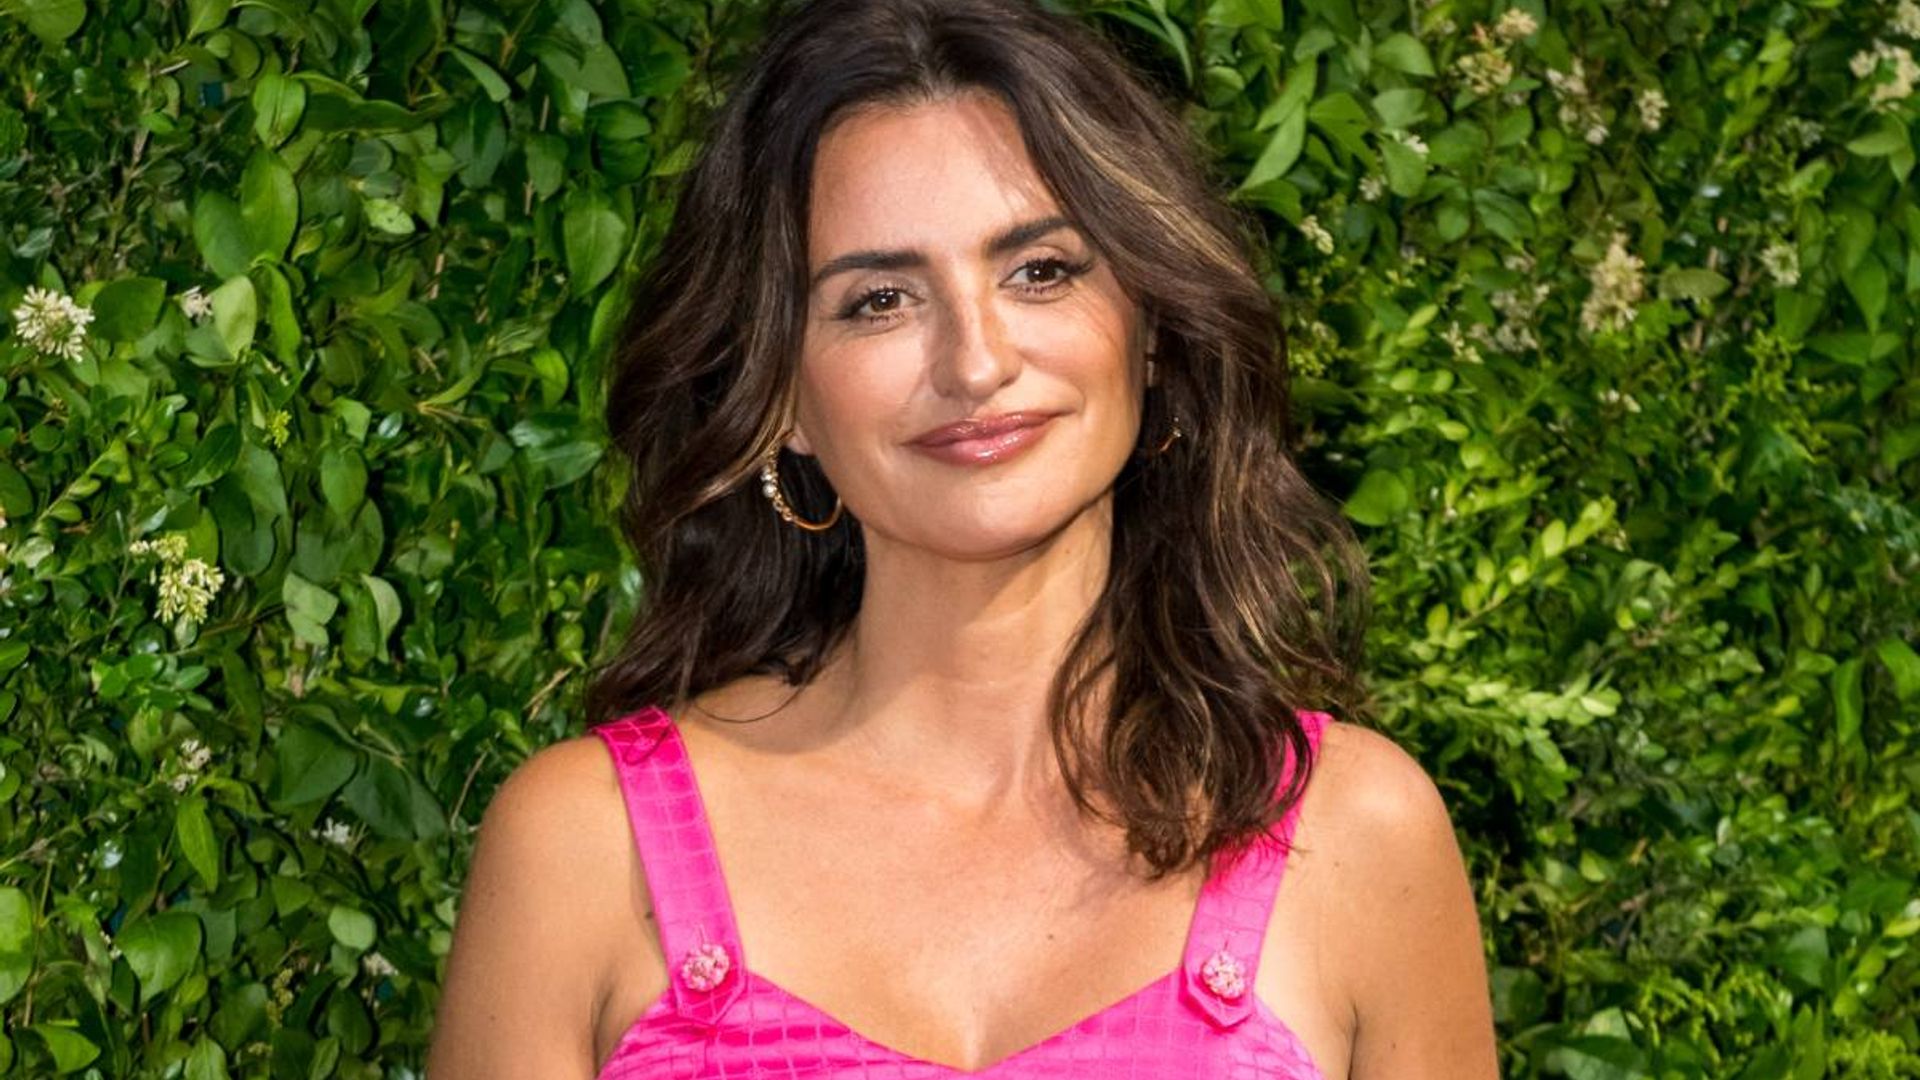 Penelope Cruz turns heads in statement pink dress as she joins famous friends at annual Tribeca dinner